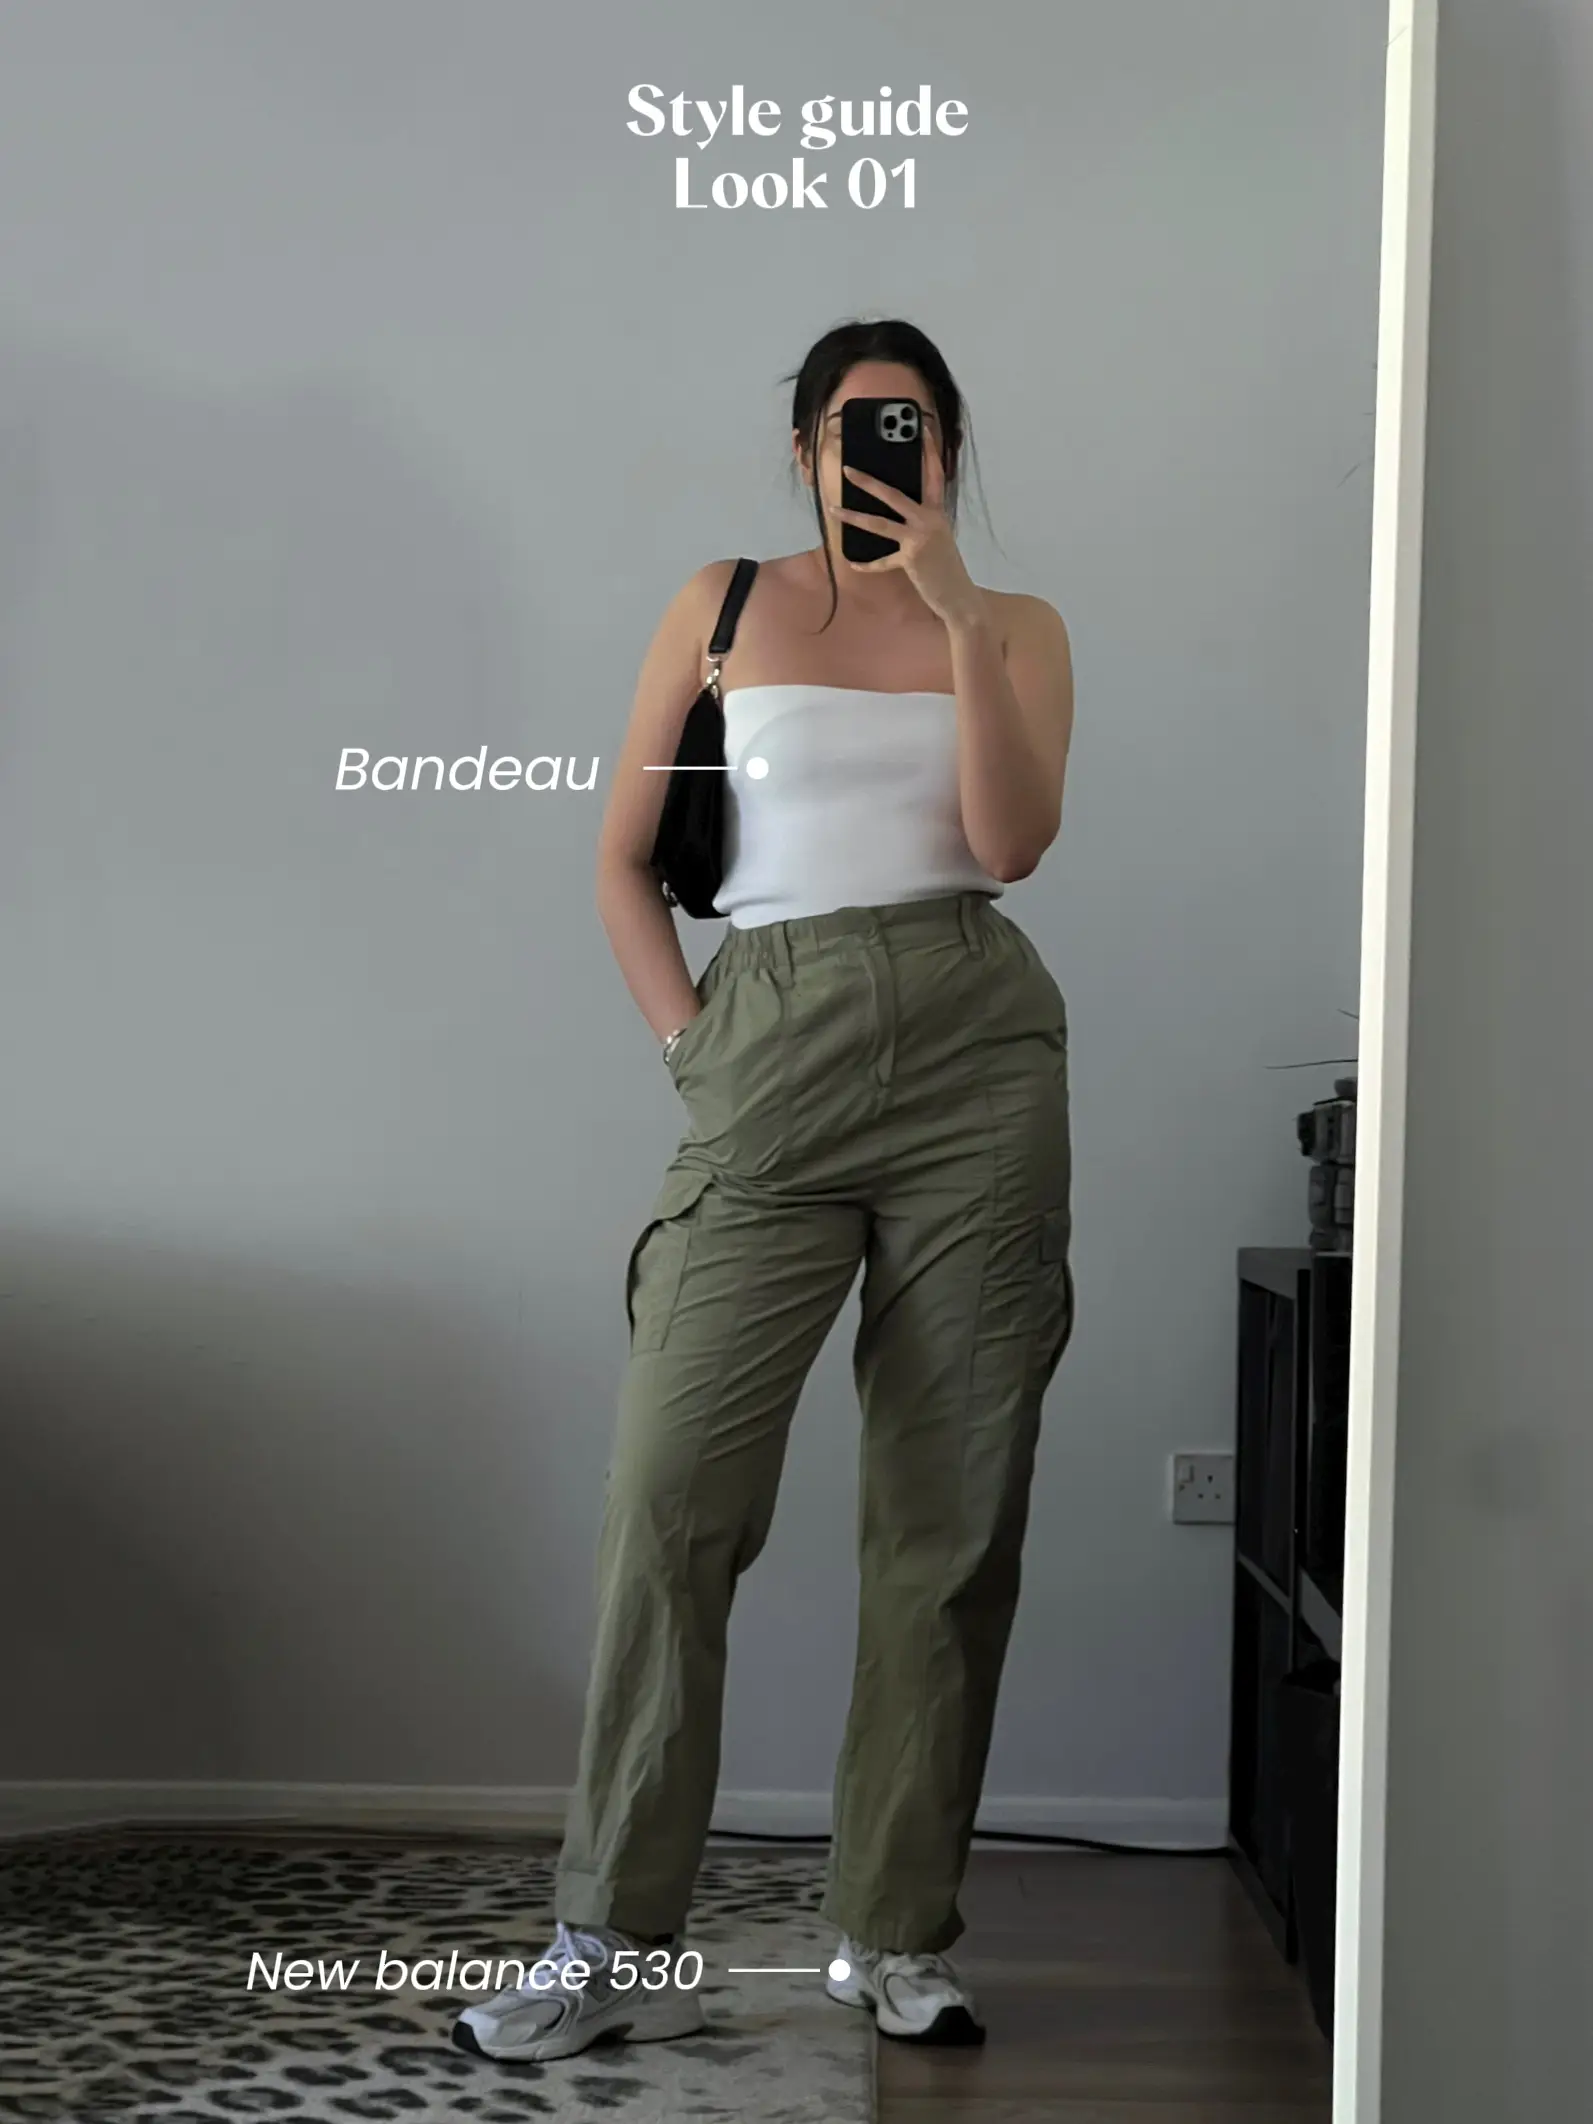 Dark Green Cargo Pants with White Shoes Outfits (166 ideas & outfits)